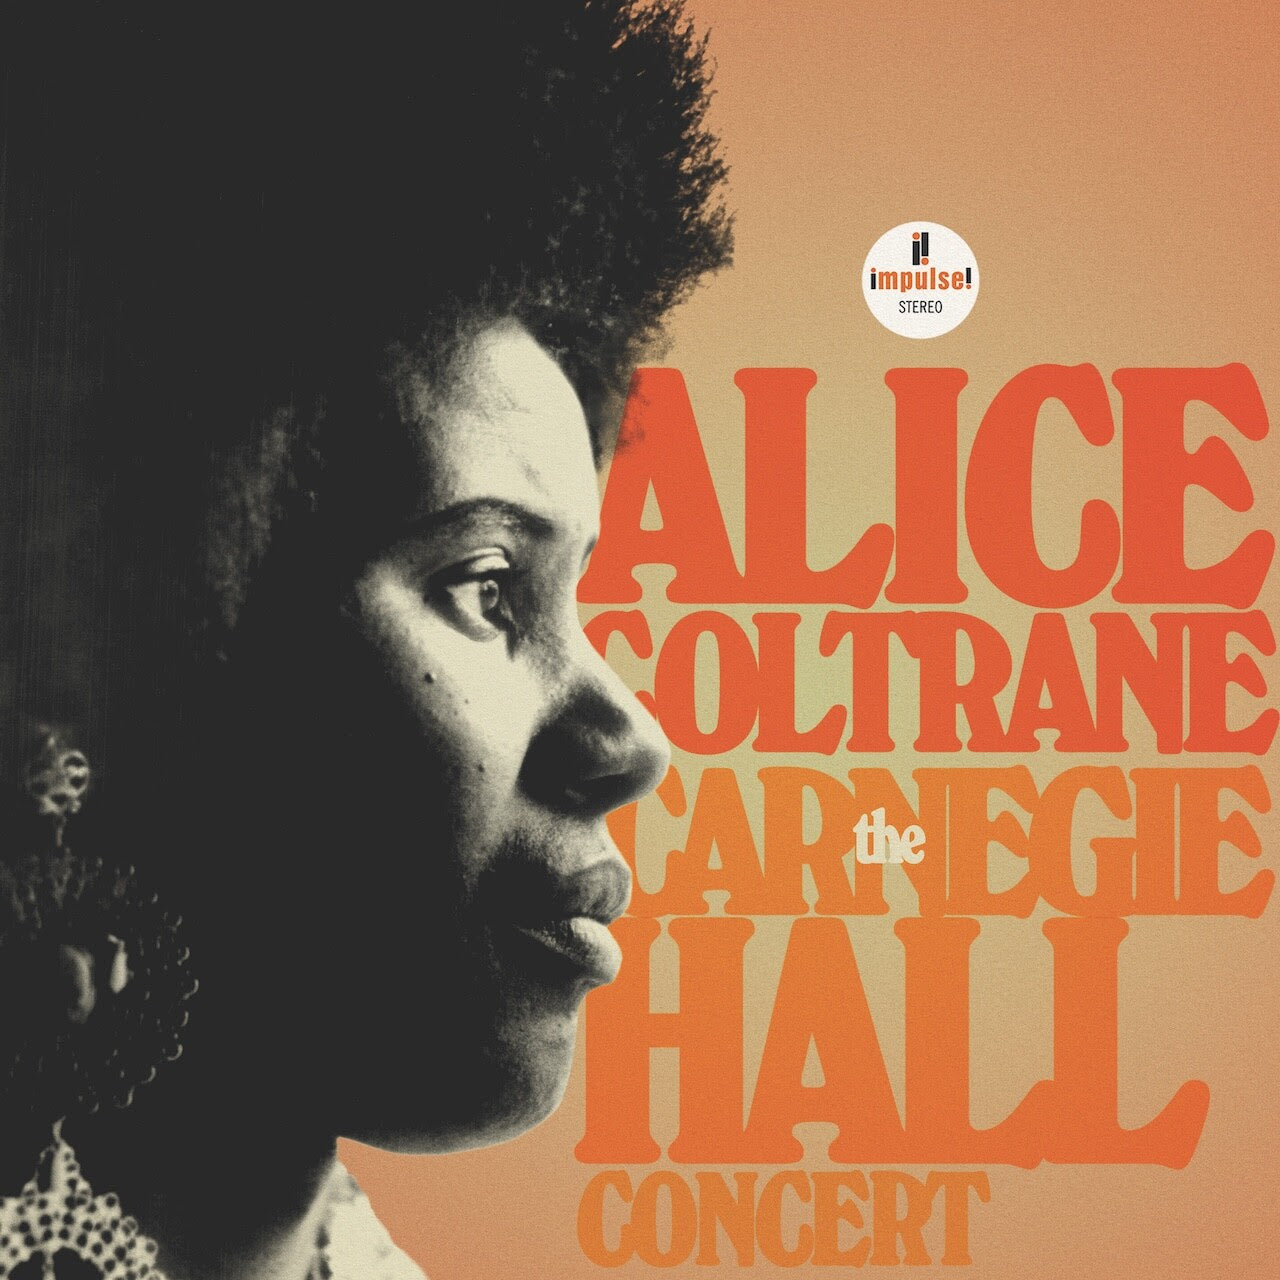 Alice Coltrane - The Carnegie Hall Concert | Buy the Vinyl LP from Flying Nun Records 